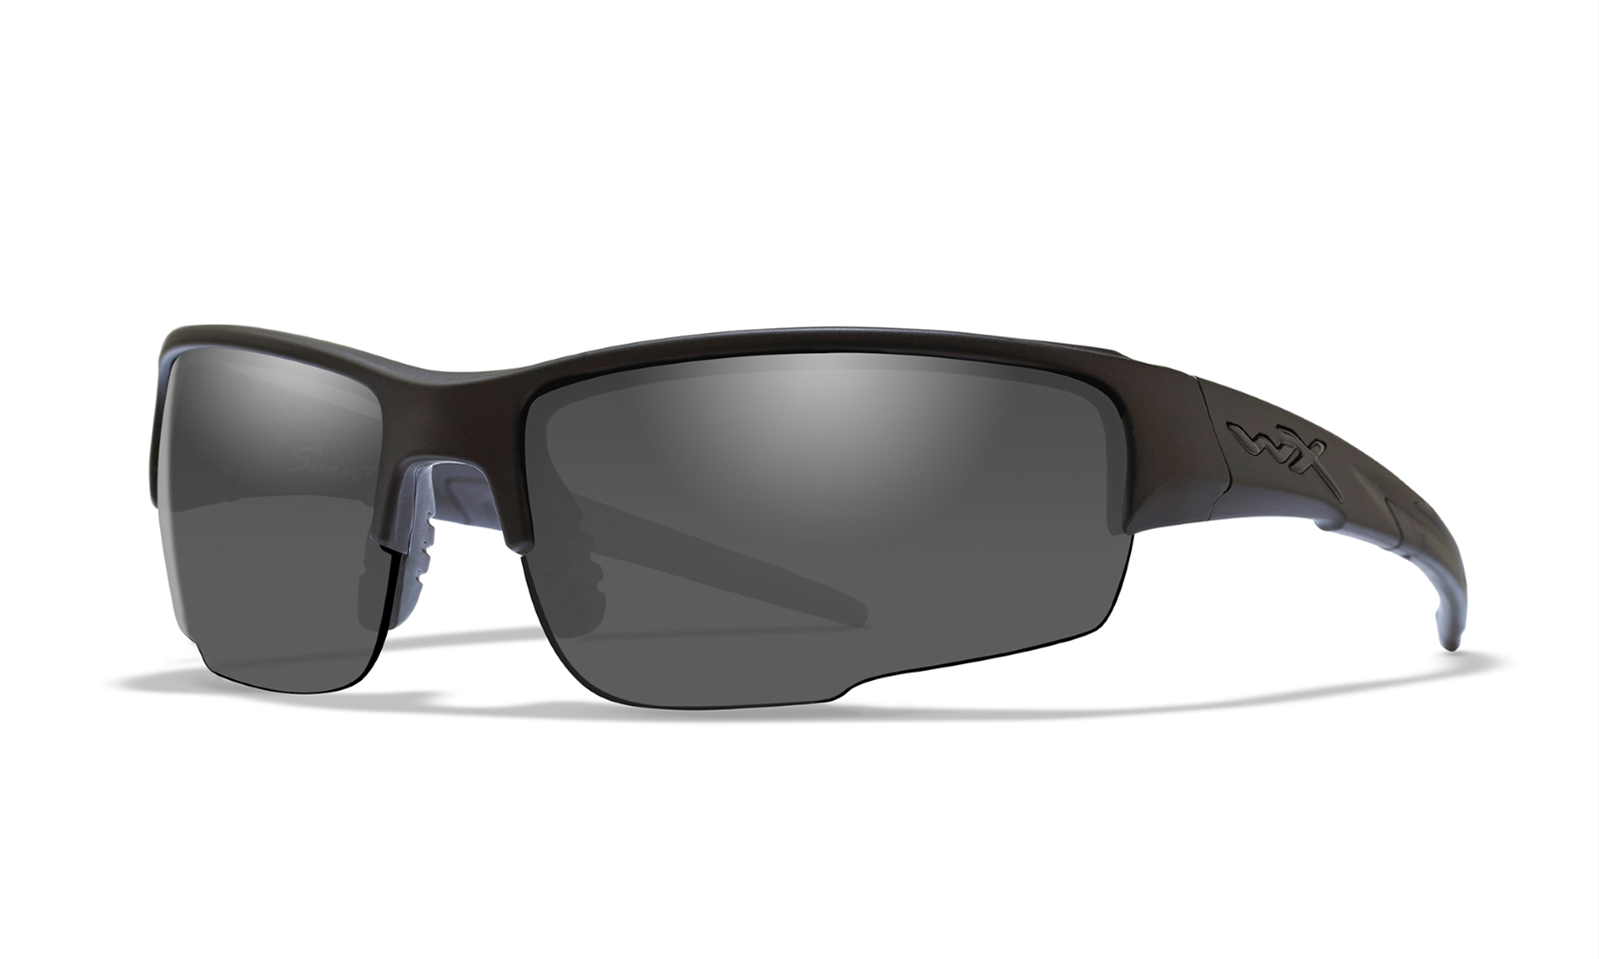 Wiley X sunglasses offer the best eye protection on the planet – Five-0  Marine